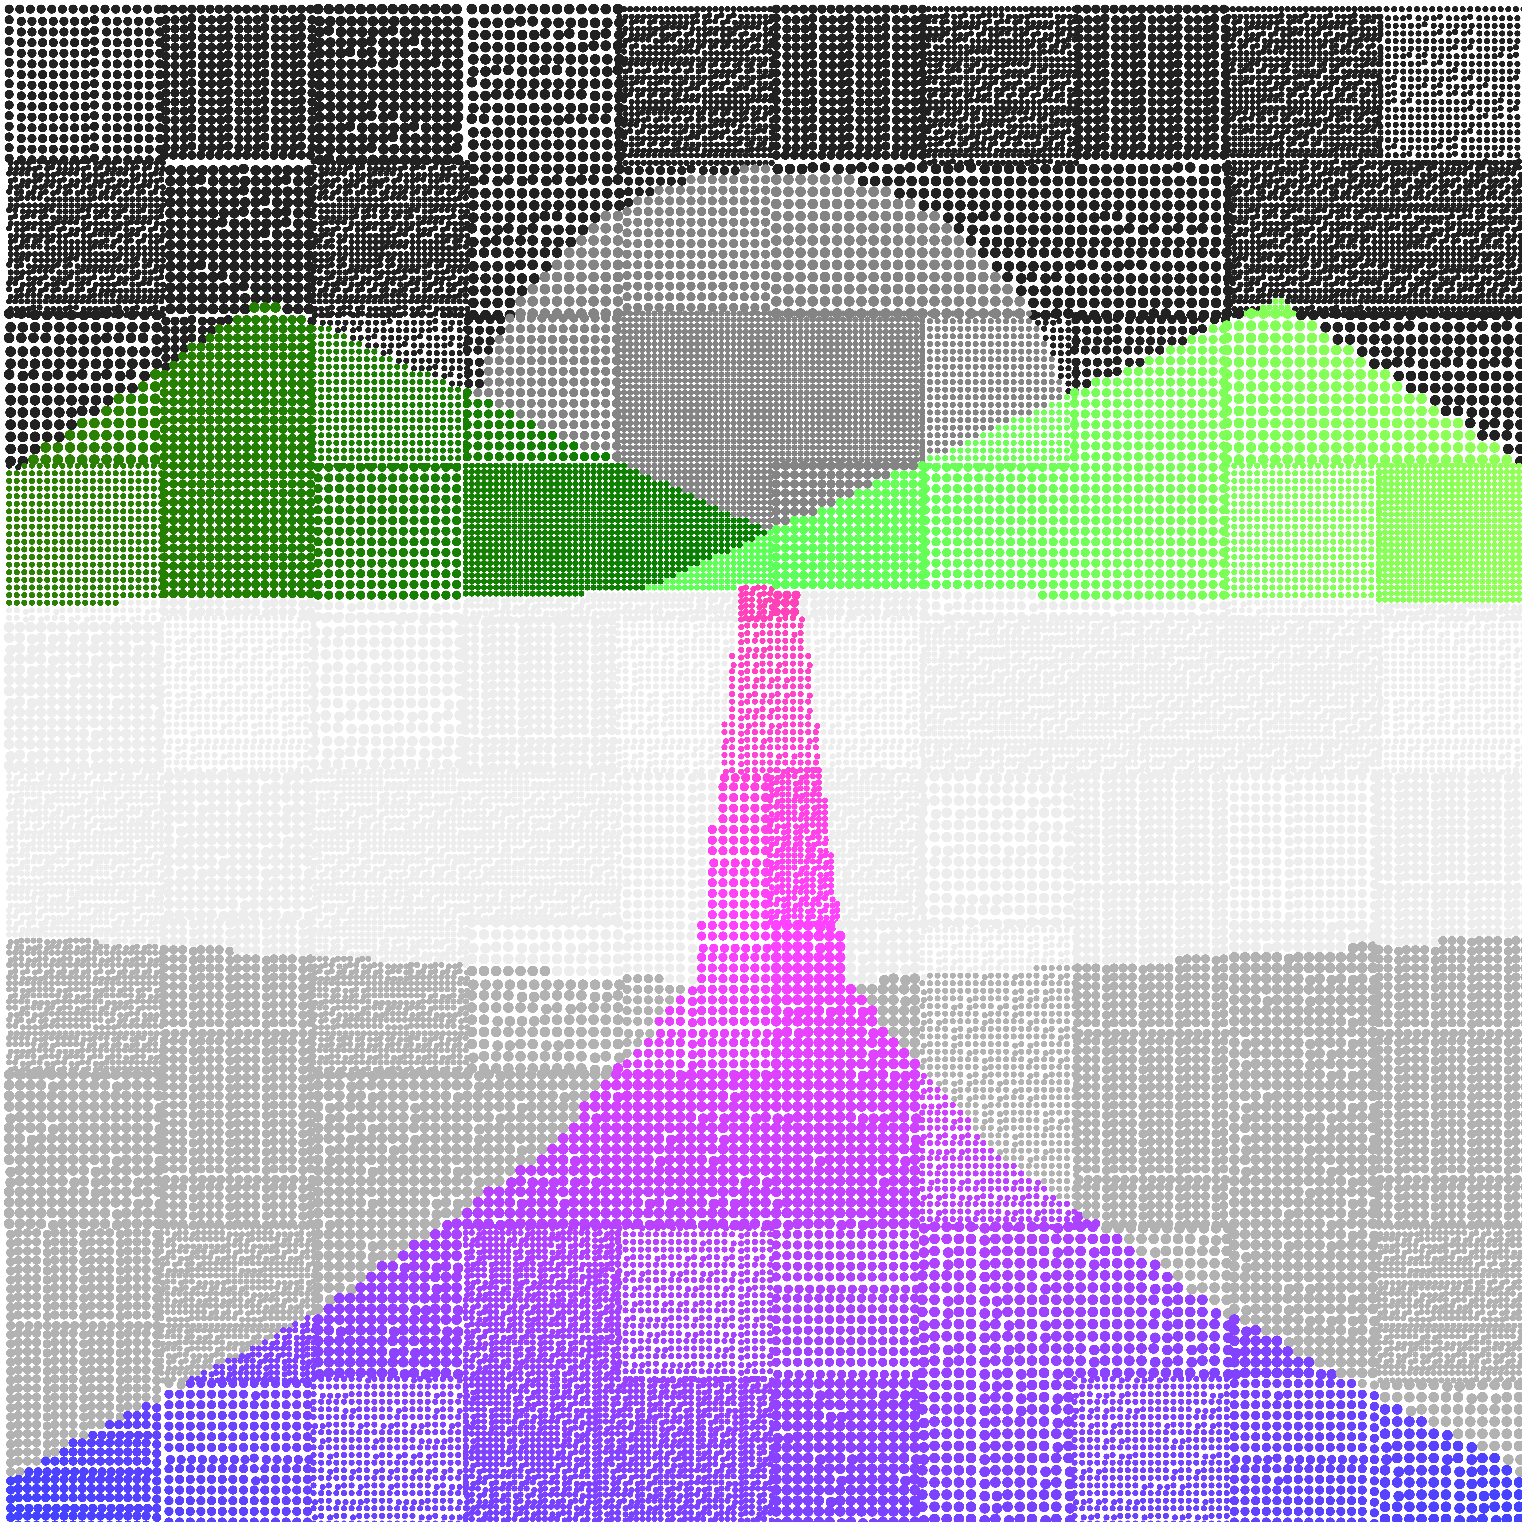 Sonoran Roadways 'Lenny' output (hue gradient blended)